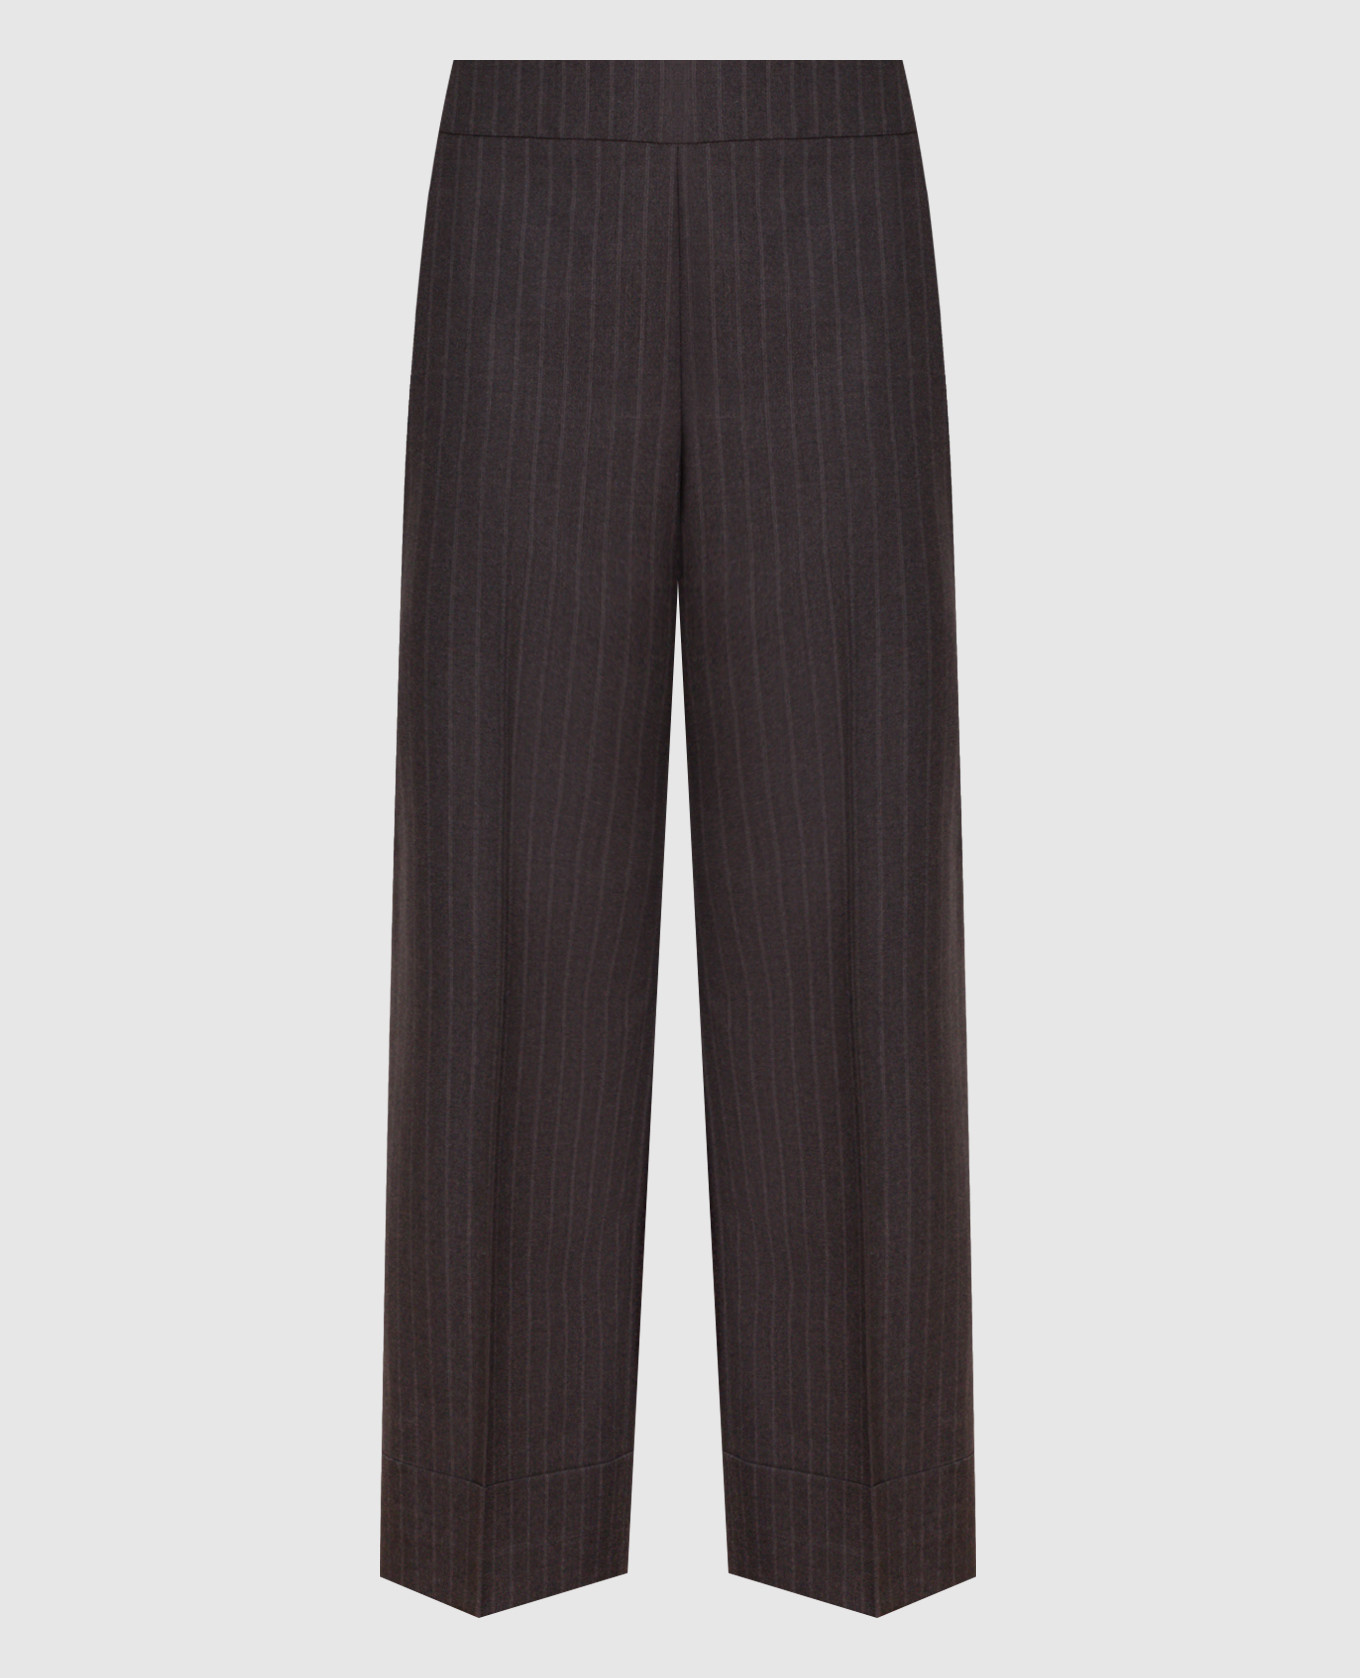 Gray striped wool trousers